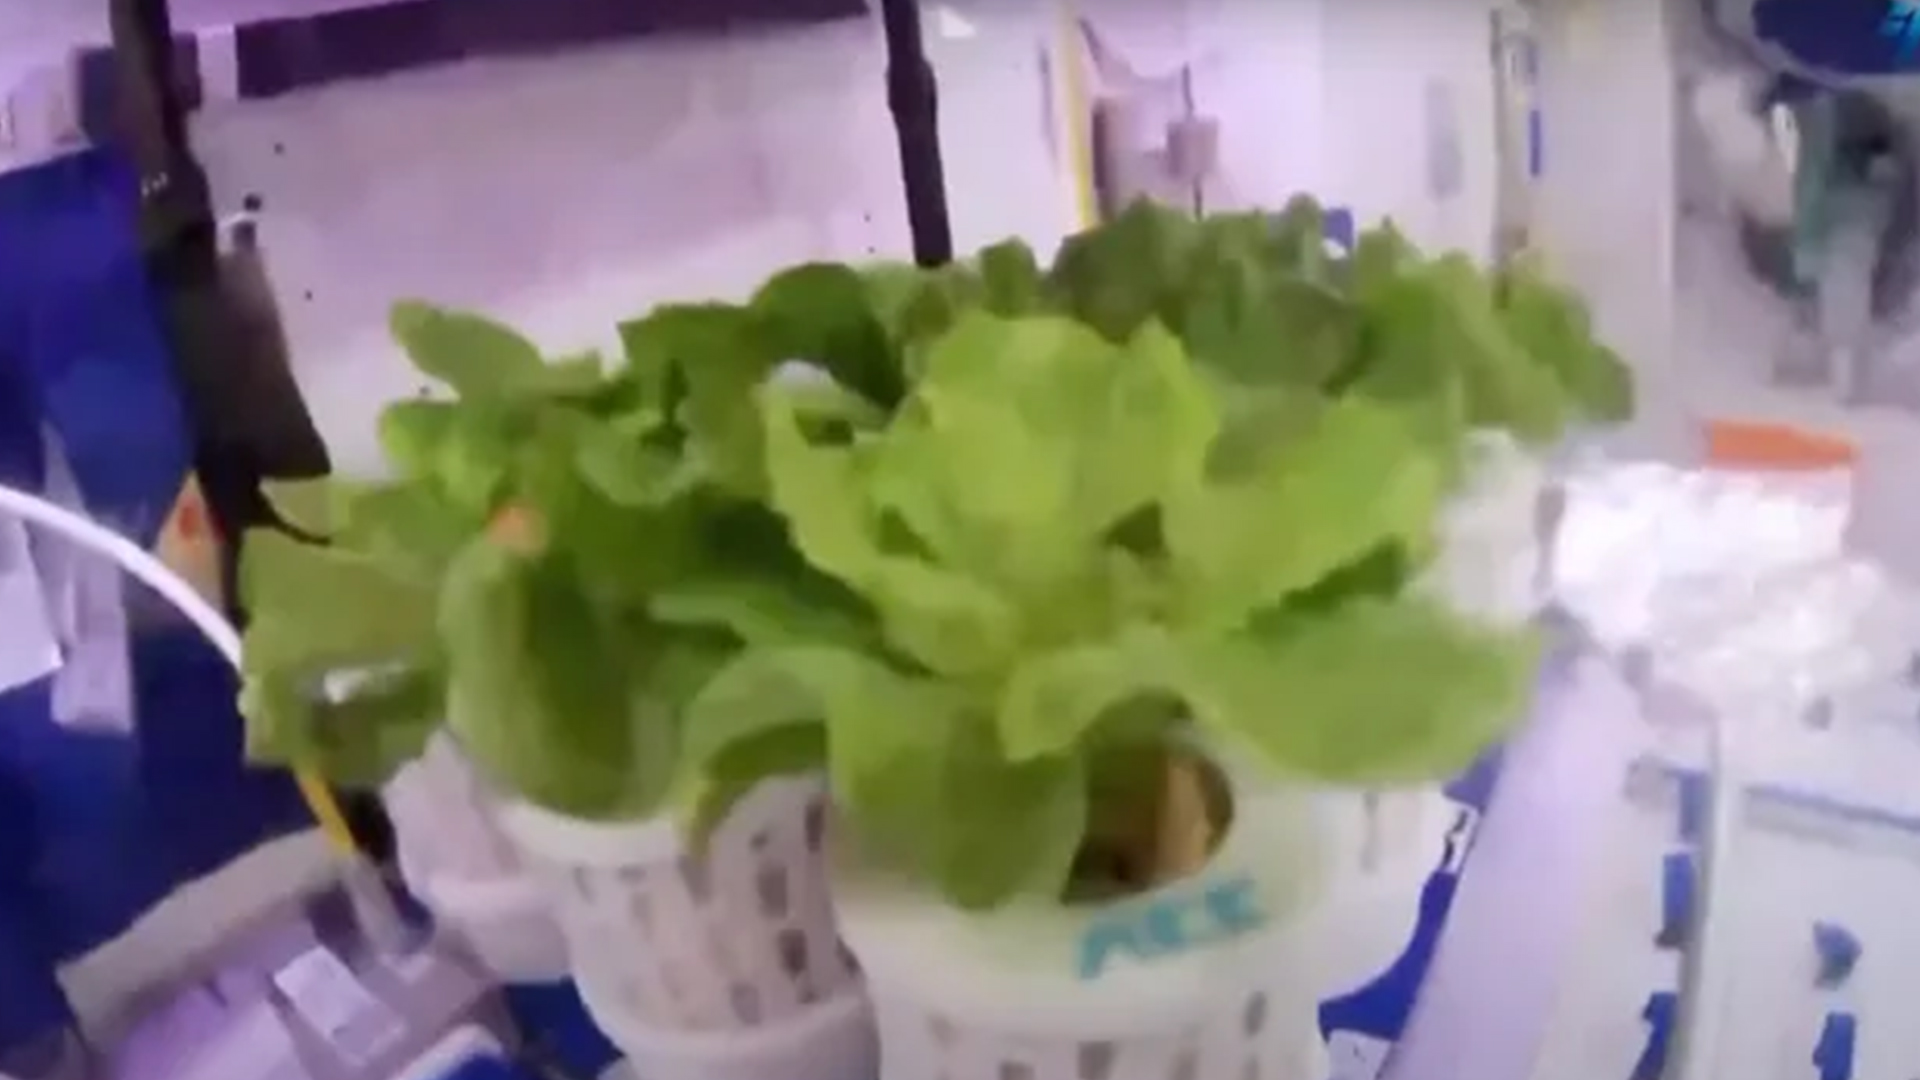  China successfully grows lettuce and tomatoes aboard Tiangong space station 